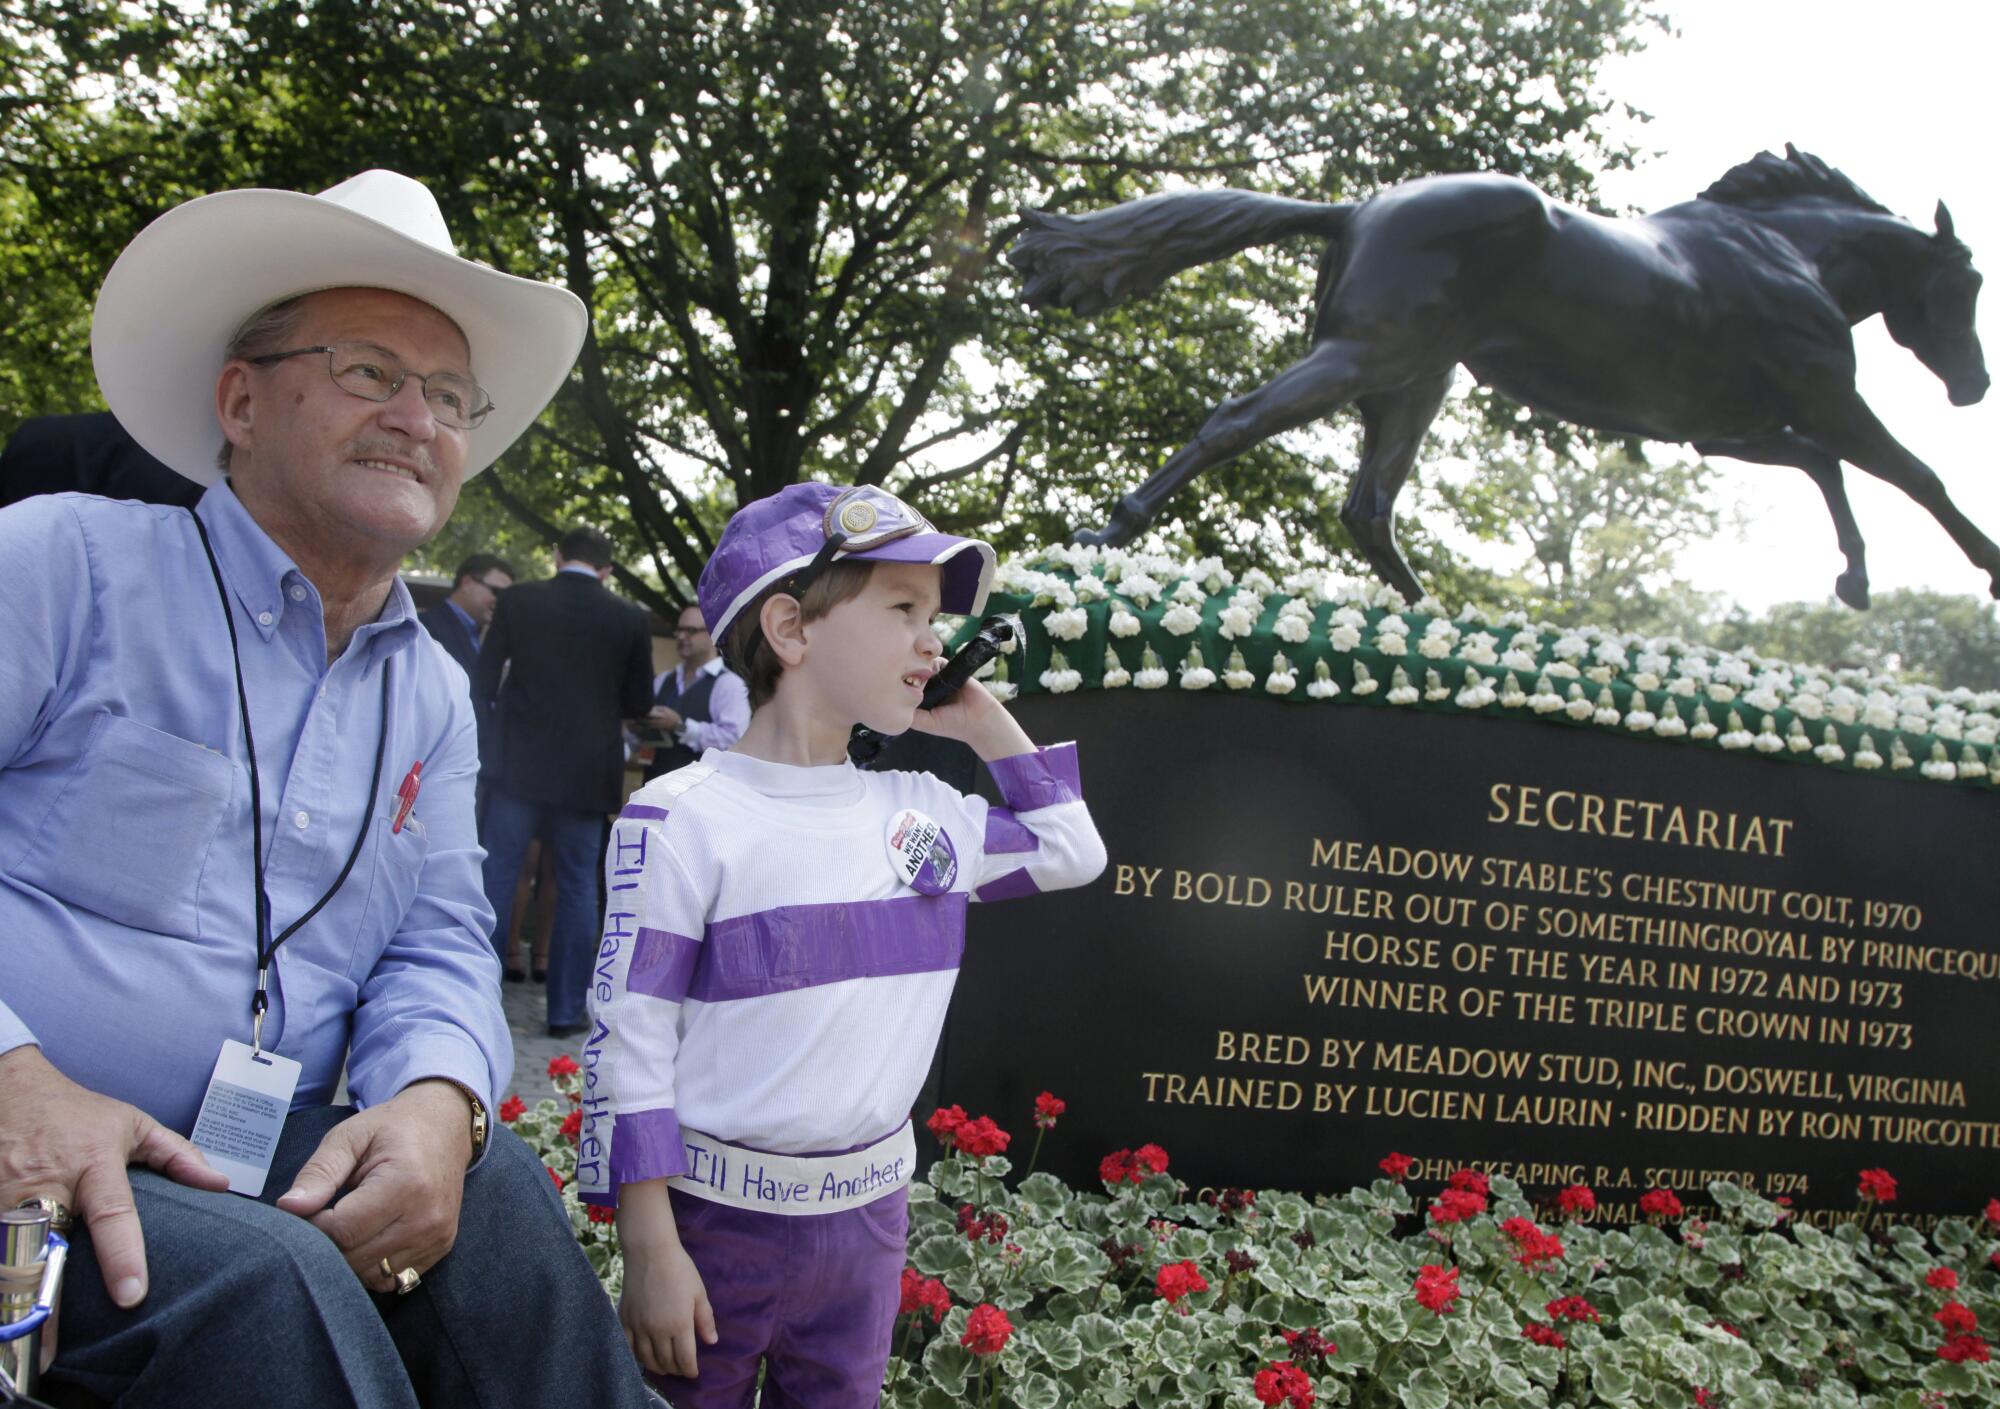 Retired jockey Ron Turcotte poses for photos with Kenny Foudy, 5, next to a statue of Secretariat.